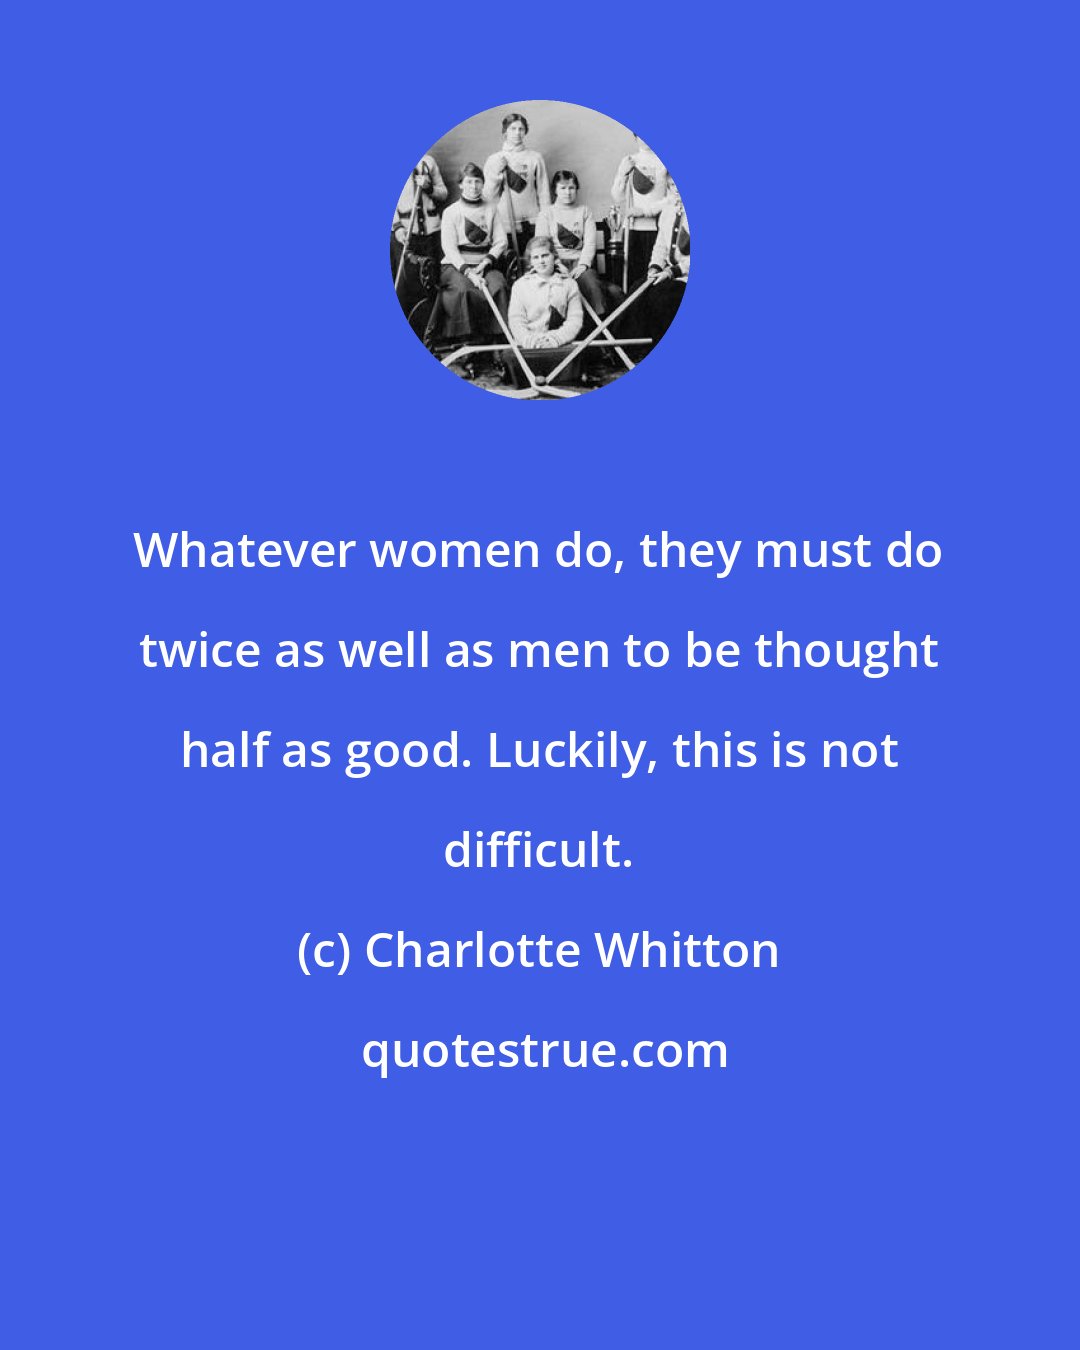 Charlotte Whitton: Whatever women do, they must do twice as well as men to be thought half as good. Luckily, this is not difficult.